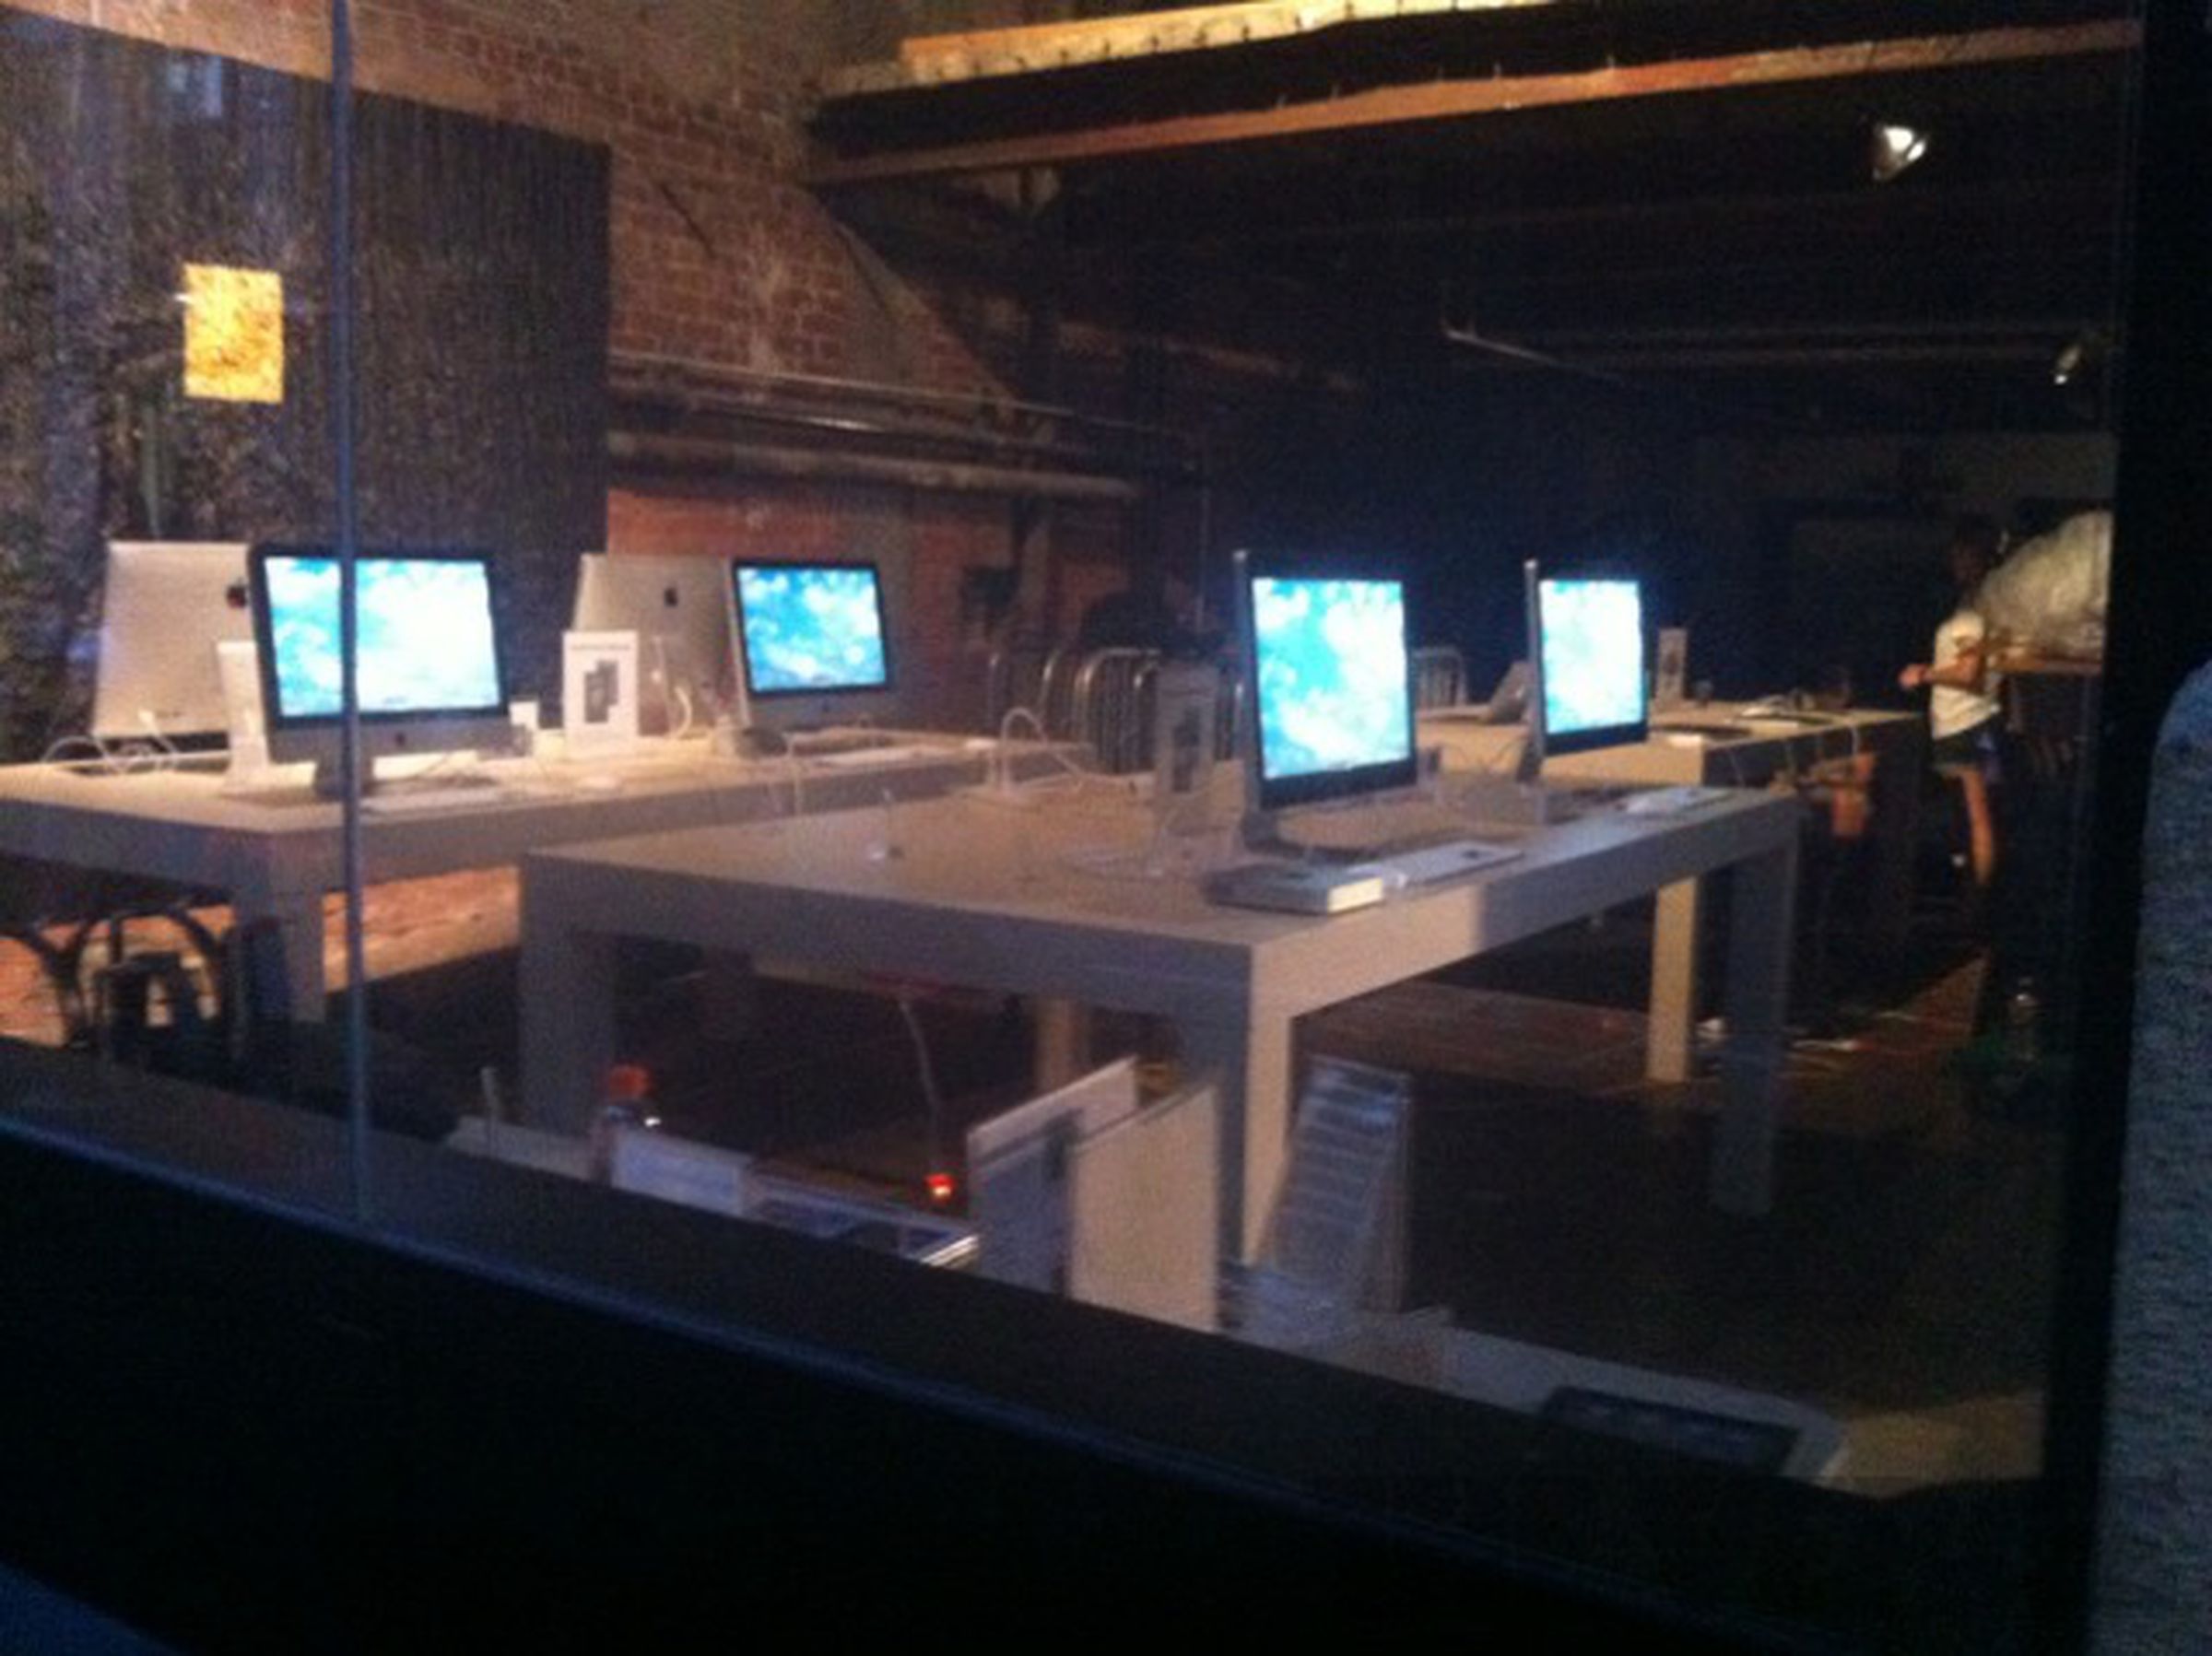 Samsung's latest anti-Apple commercial set pictures